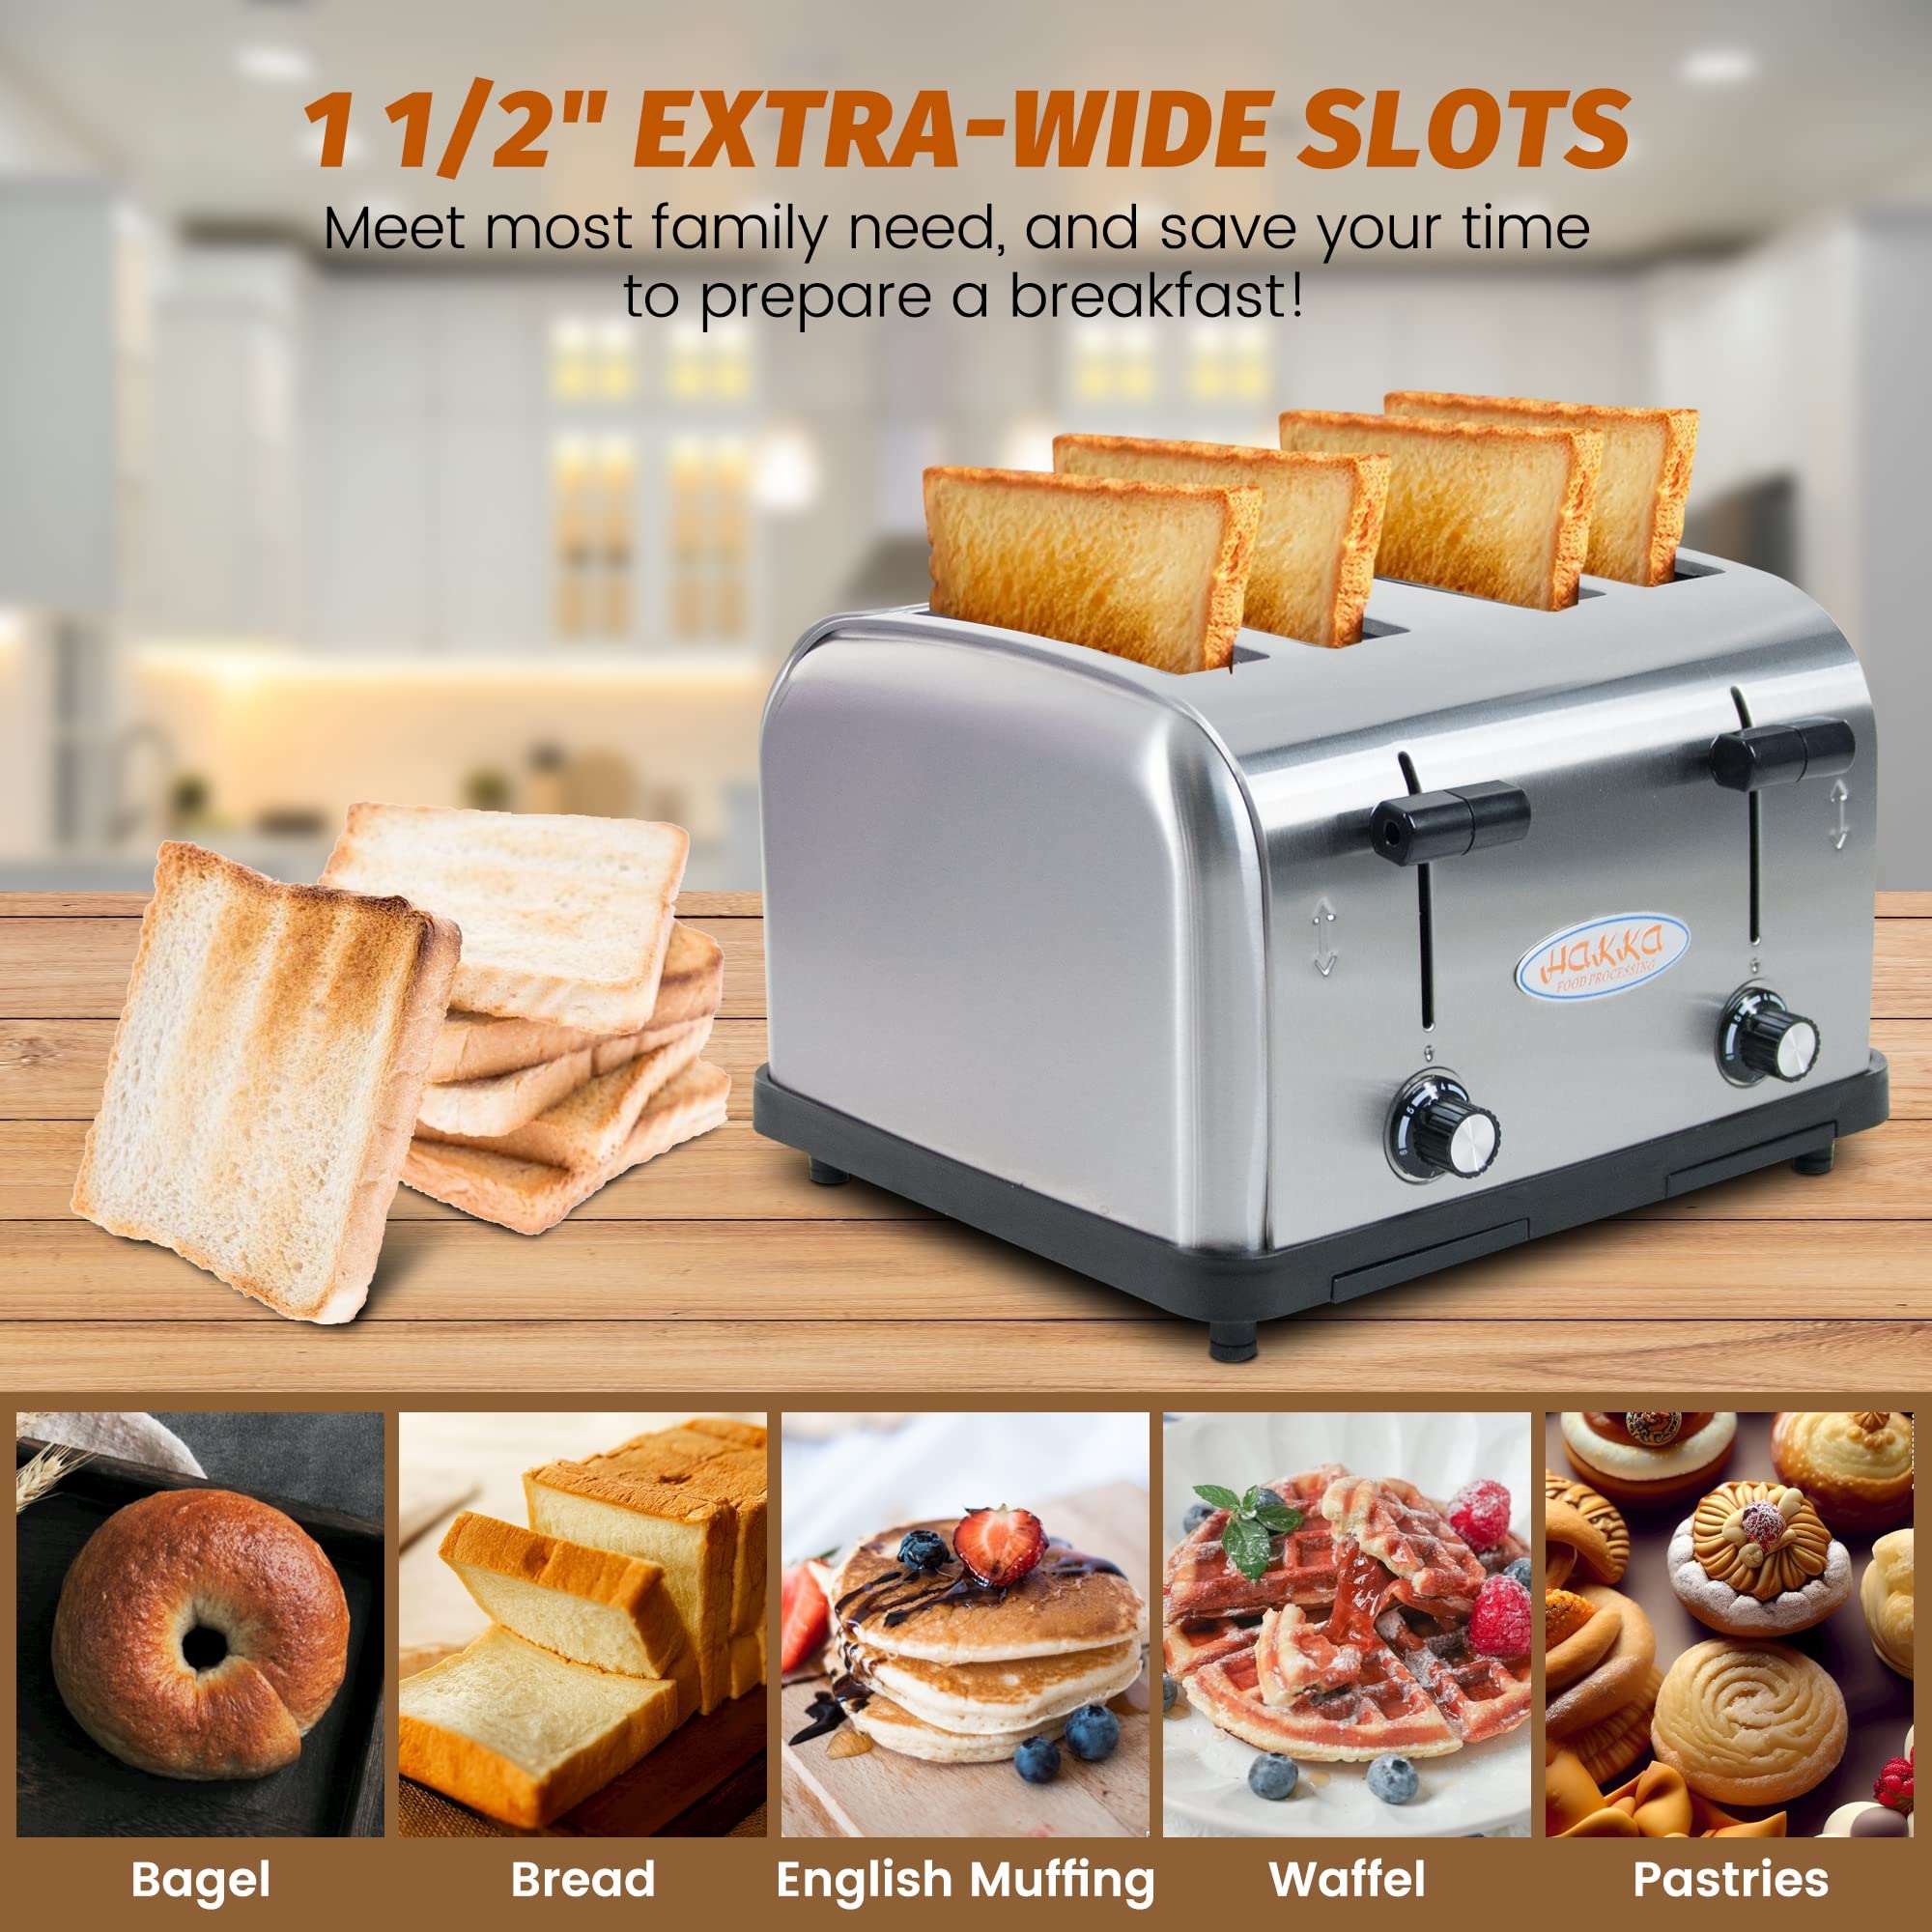 EasyRose Toaster 4 Slice, Heavy-Duty Stainless Steel Toaster Commercial Toaster with Extra Wide Slots with Auto Shut-off/Cancel Button & Removable Crumb Tray, 1800W/120V